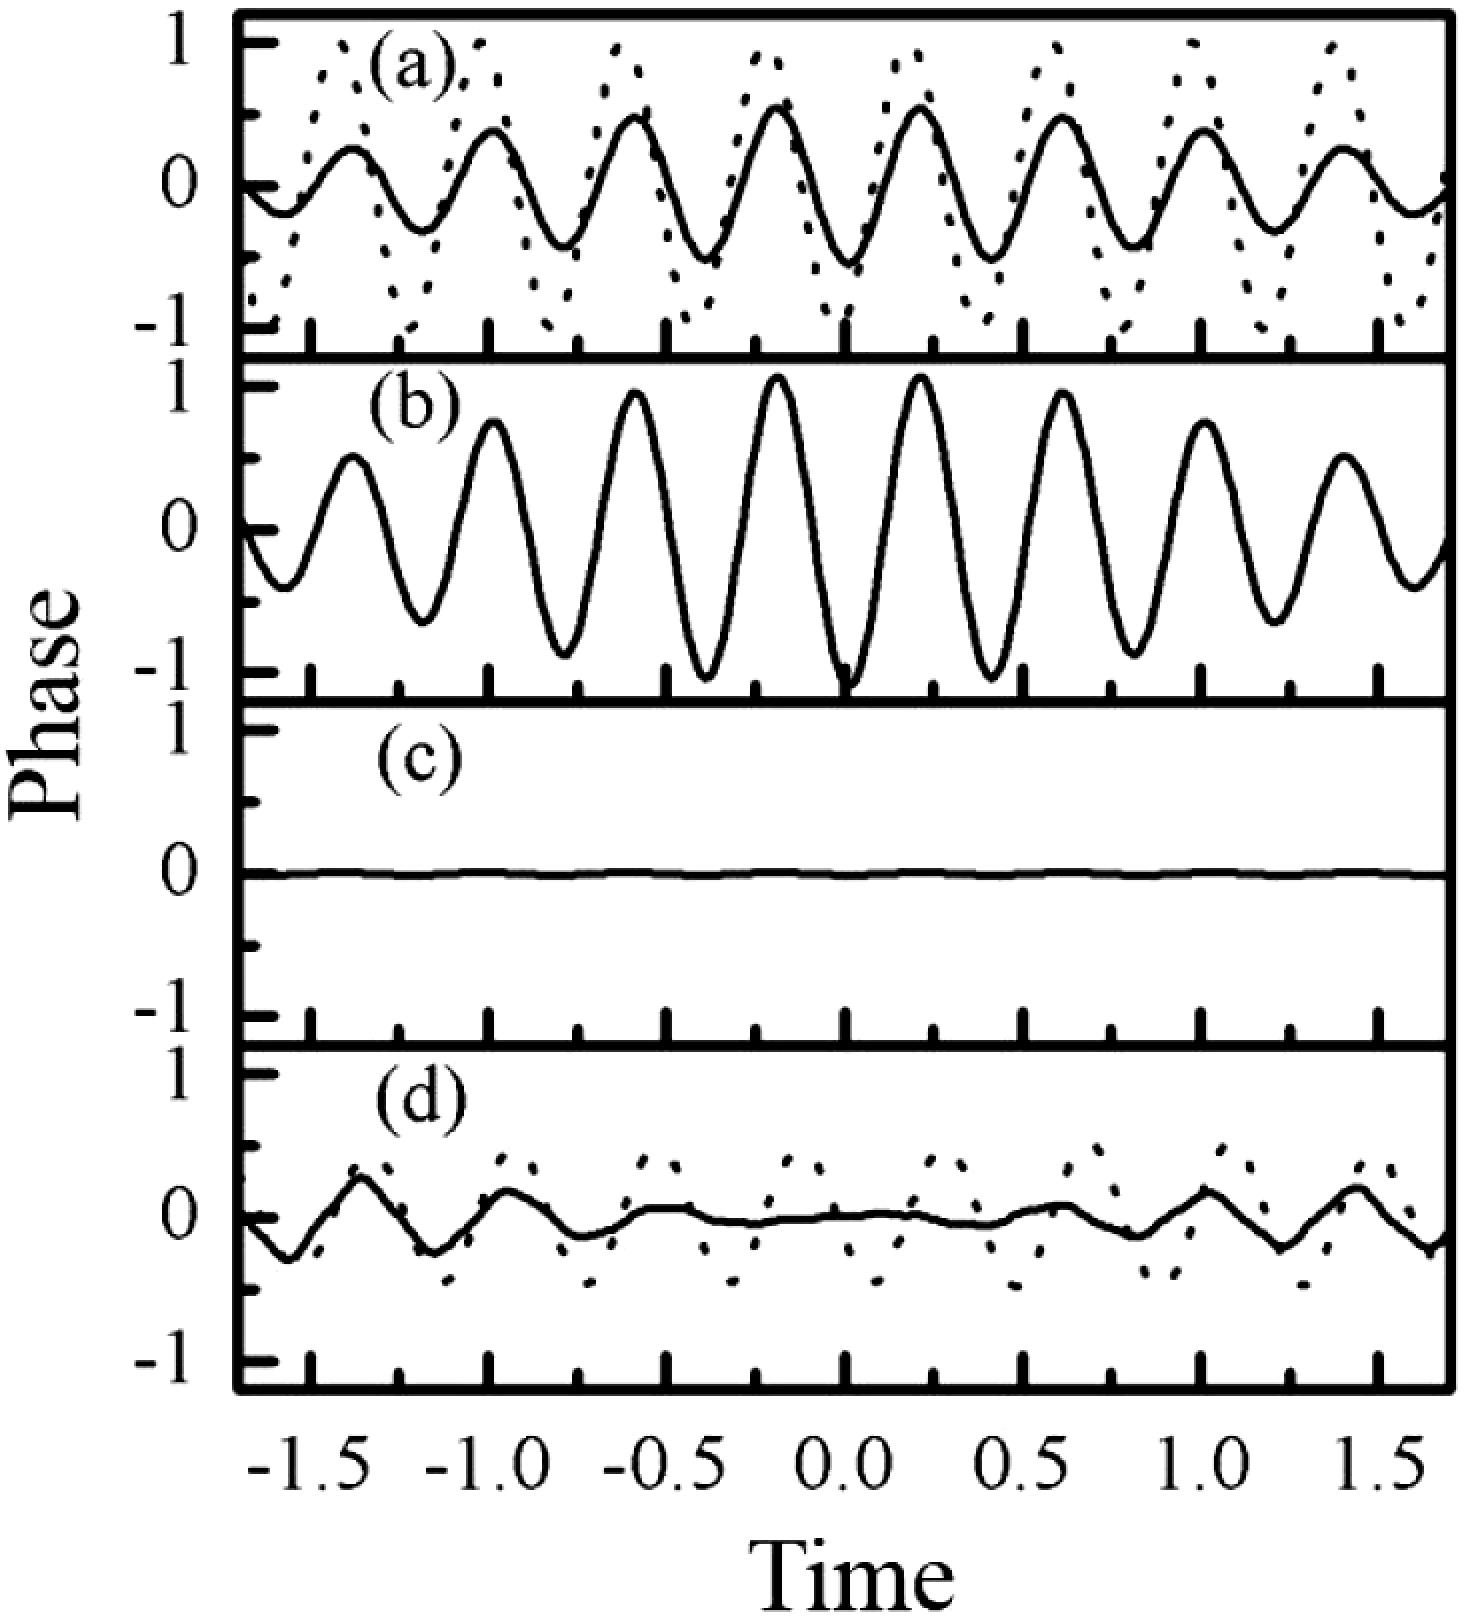 Calculated signal phase distortion and restoration in a two-stage OPA system. (a) The dotted line plots the initial phase modulation on the pump pulse. The solid line is the phase of the amplified signal from the first stage OPA. (b) The phase of the amplified signal from the second OPA stage which is seeded by the amplified signal from the first stage (conventional multistage OPA configuration). (c) The phase of the amplified signal from a hybrid seeded OPA with the condition . (d) The phase of the amplified signal (solid line) from a hybrid seeded OPA with the condition . The dotted line in (d) is the phase of the pump pulse after amplification. The nonlinear length [14], as an identification of the pump intensity, was fixed in the calculations to be for each stage.